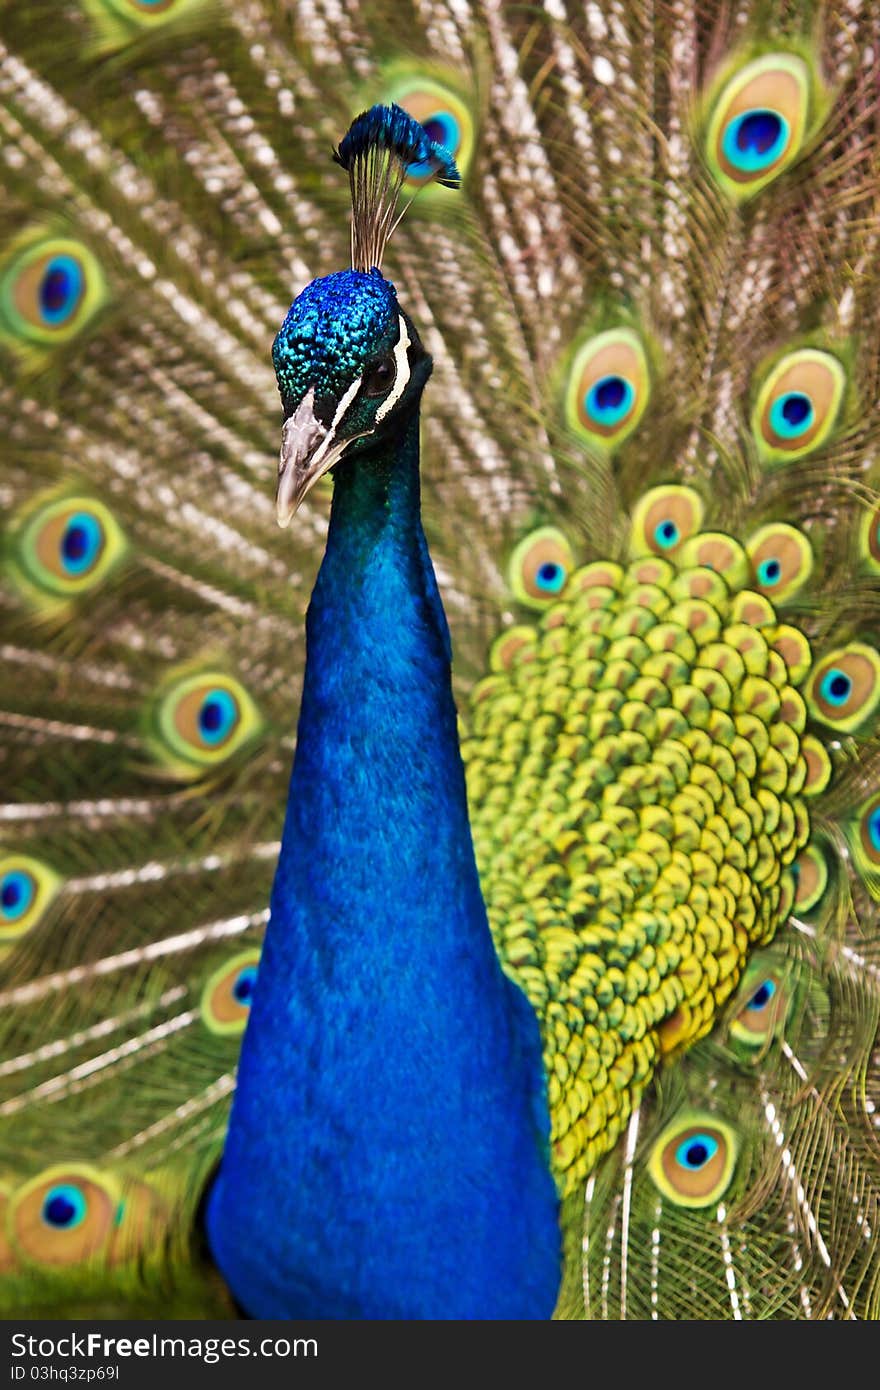 Indian Blue Peacock strutting his stuff